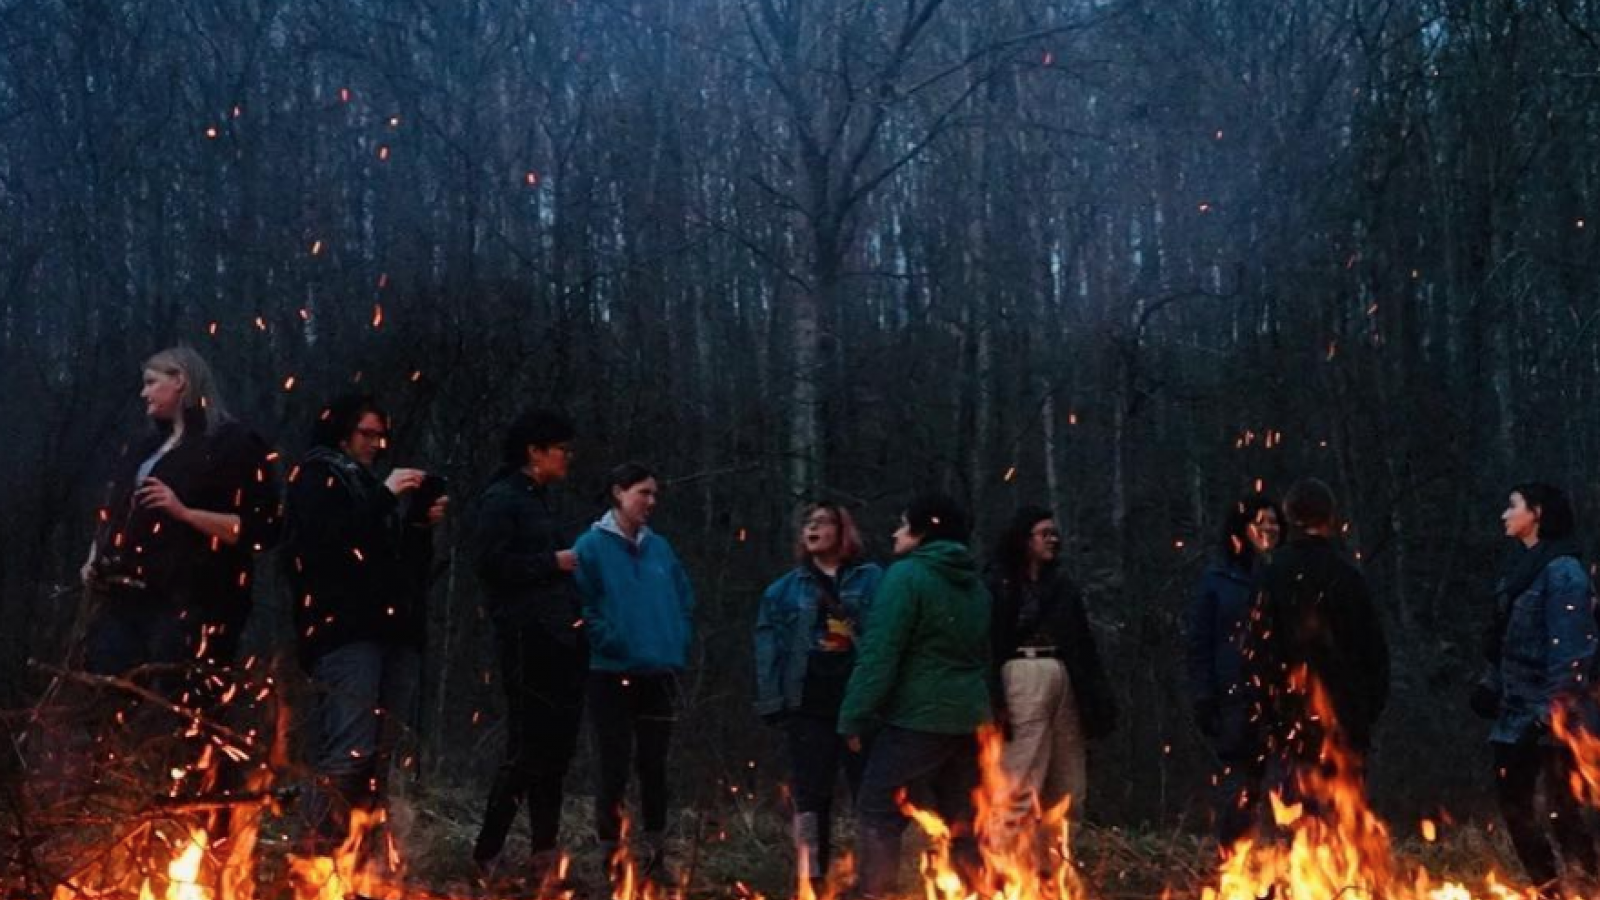 Image of field school students standing behind a fire in the woods